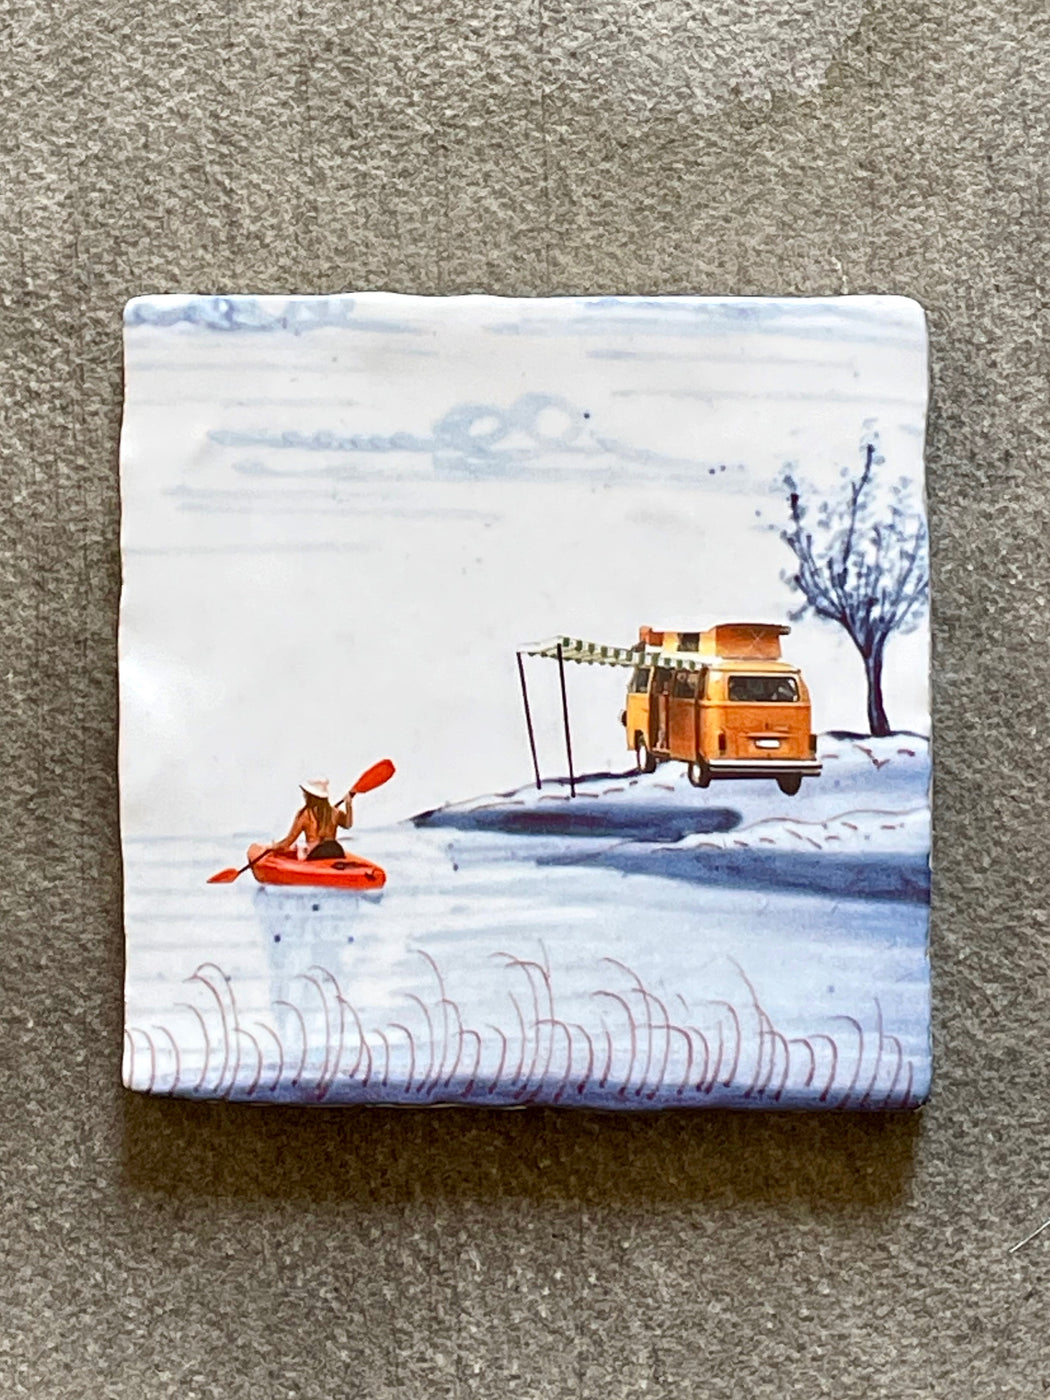 "Into the Wild" Story Tile by Marga Van Oers